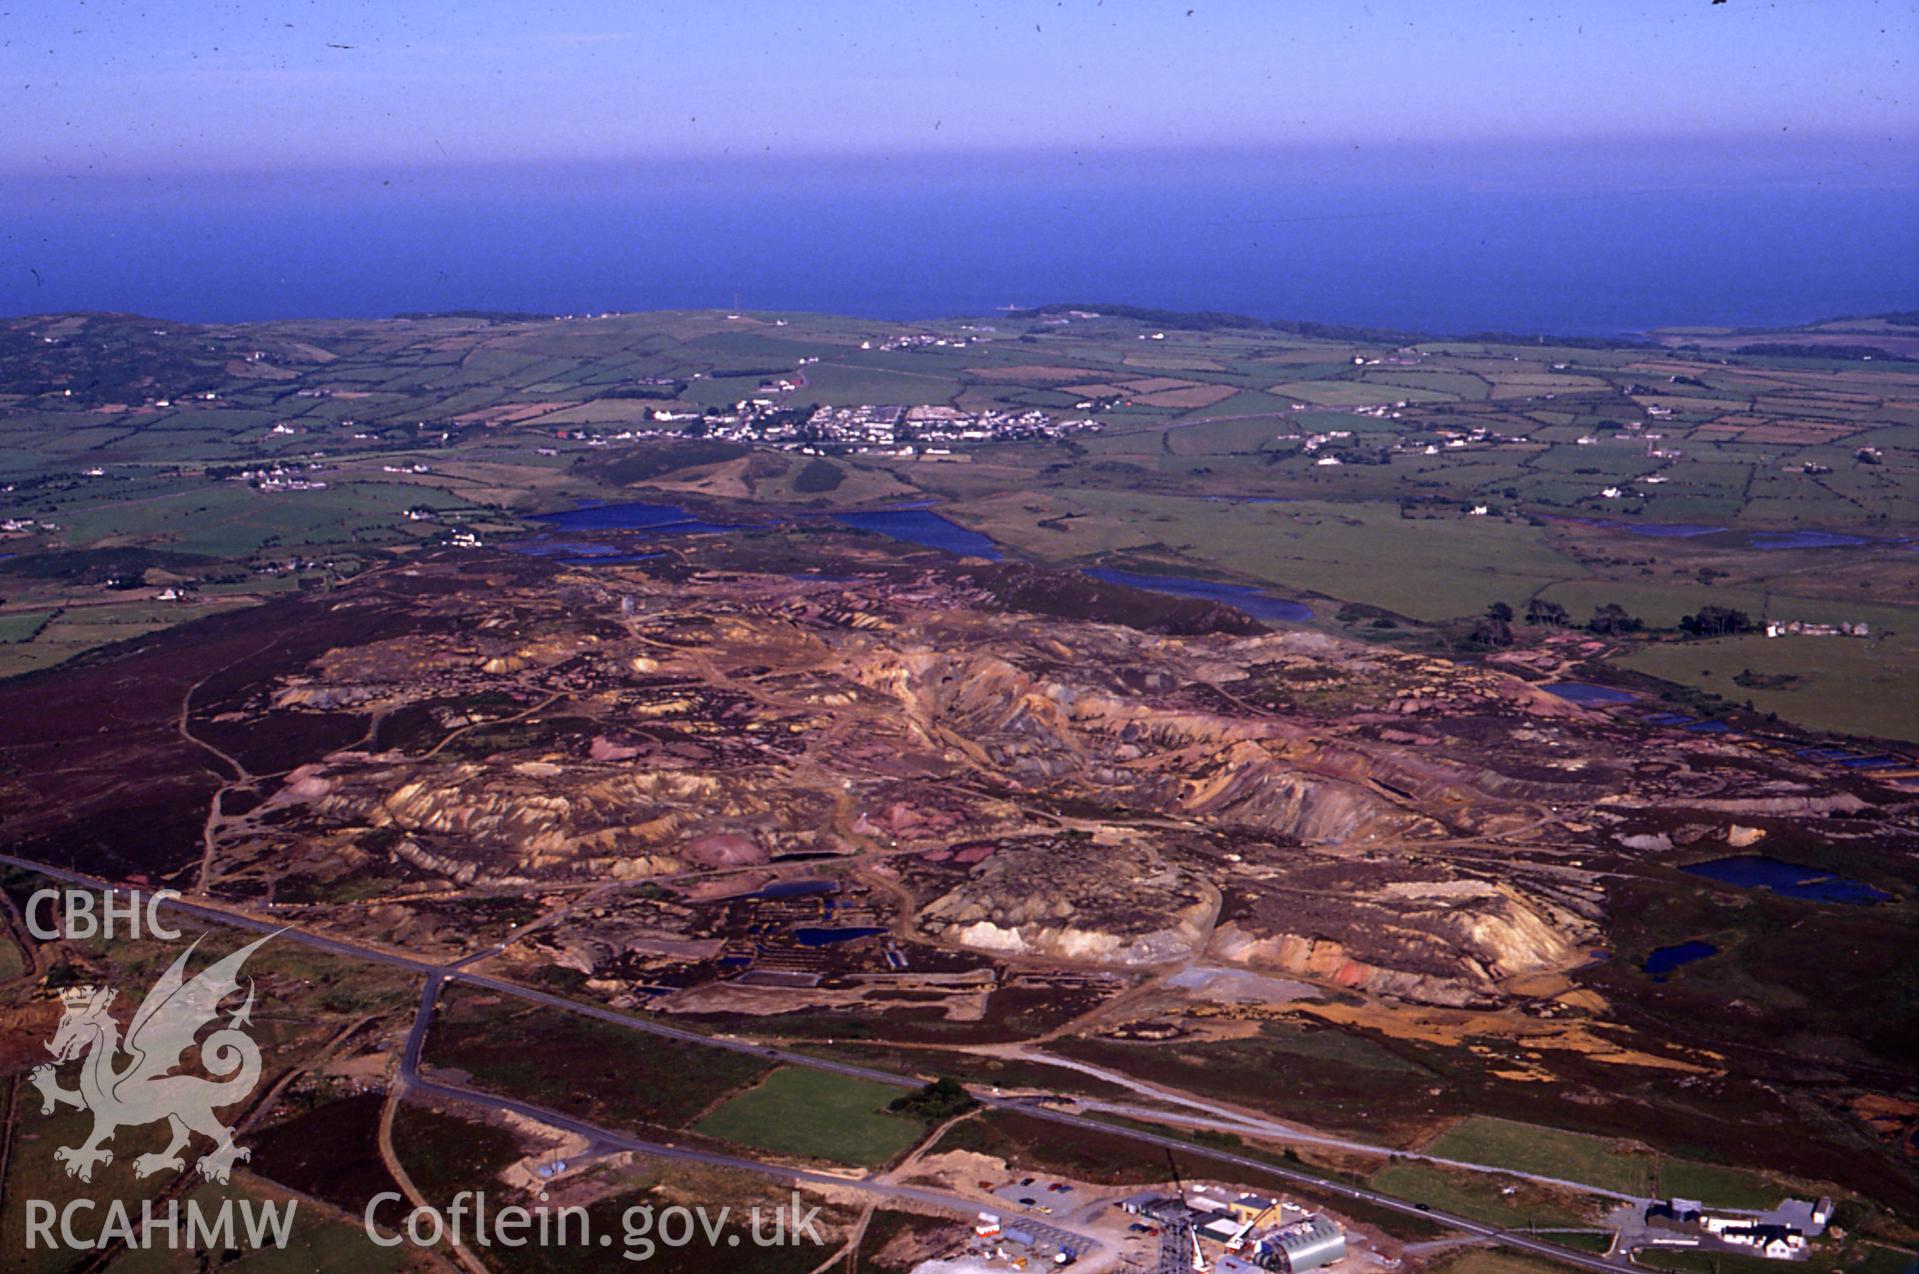 Slide of RCAHMW colour oblique aerial photograph of Parys Mountain Copper Mines, Amlwch, taken by C.R. Musson, 11/7/1989.